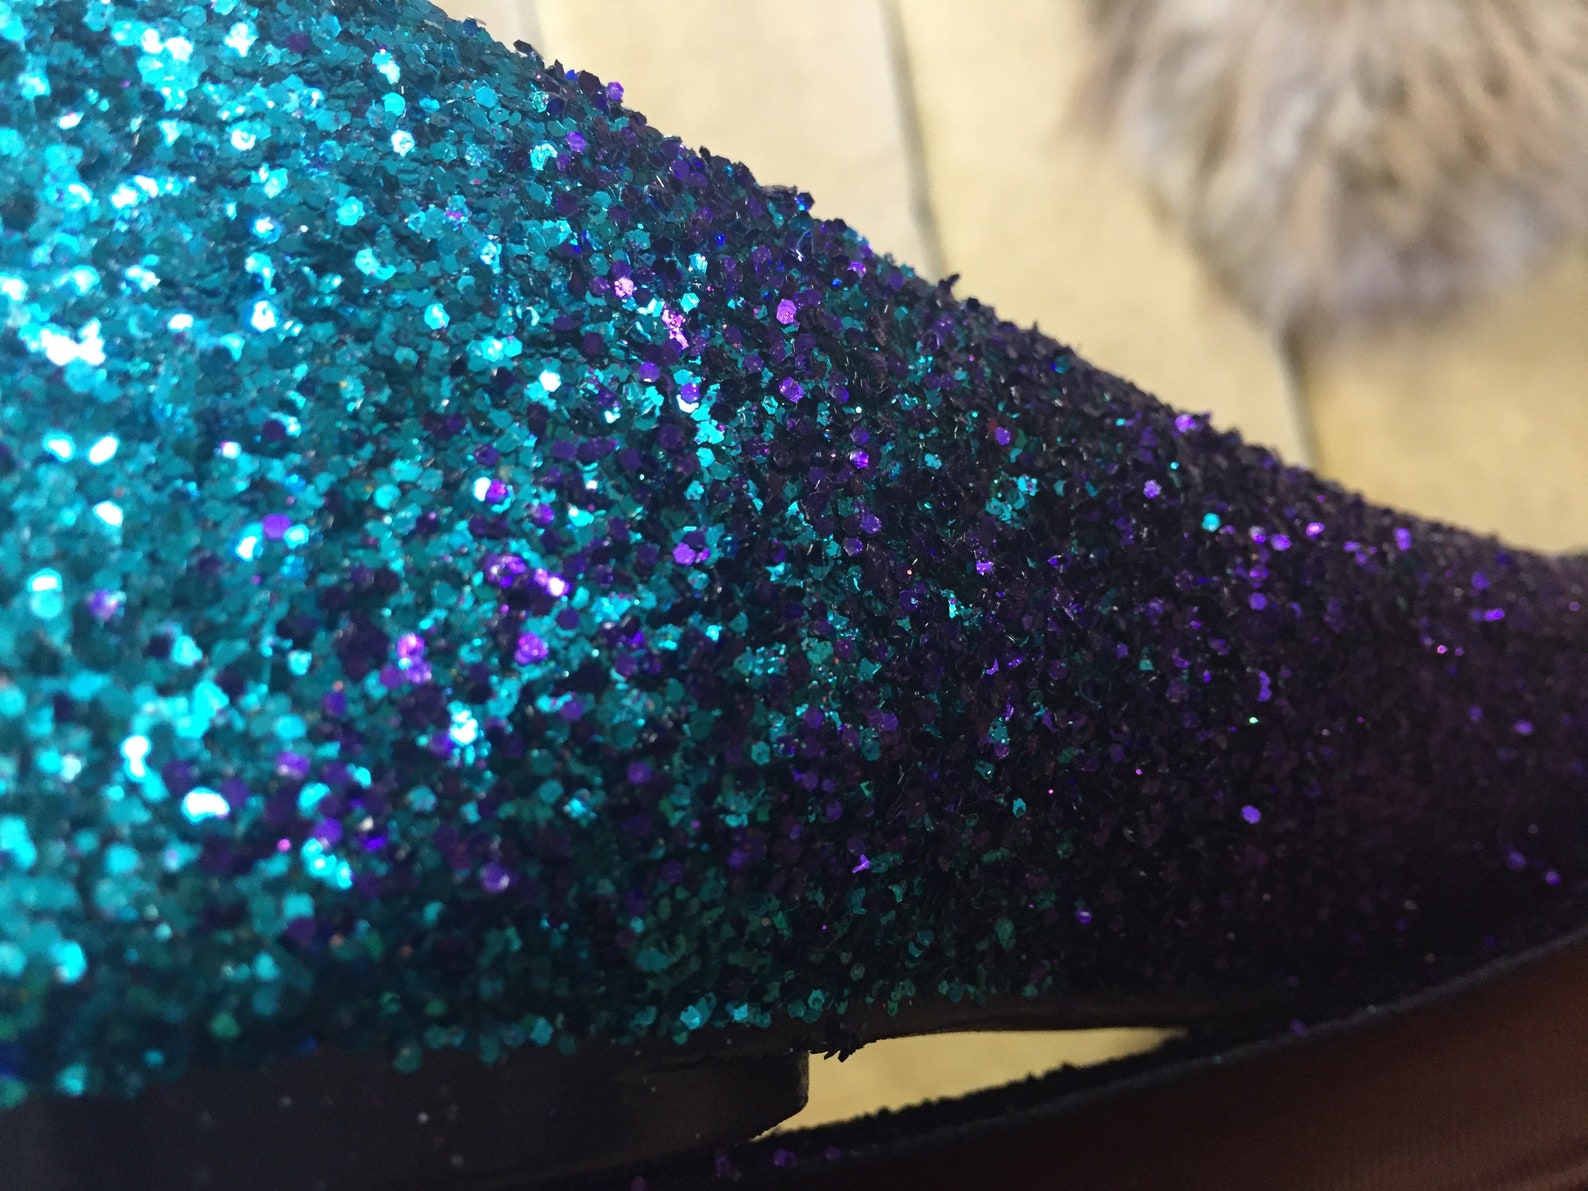 woman's custom made to order ballet flats. glitter flats. slip on shoes. teal to royal purple ombre design.